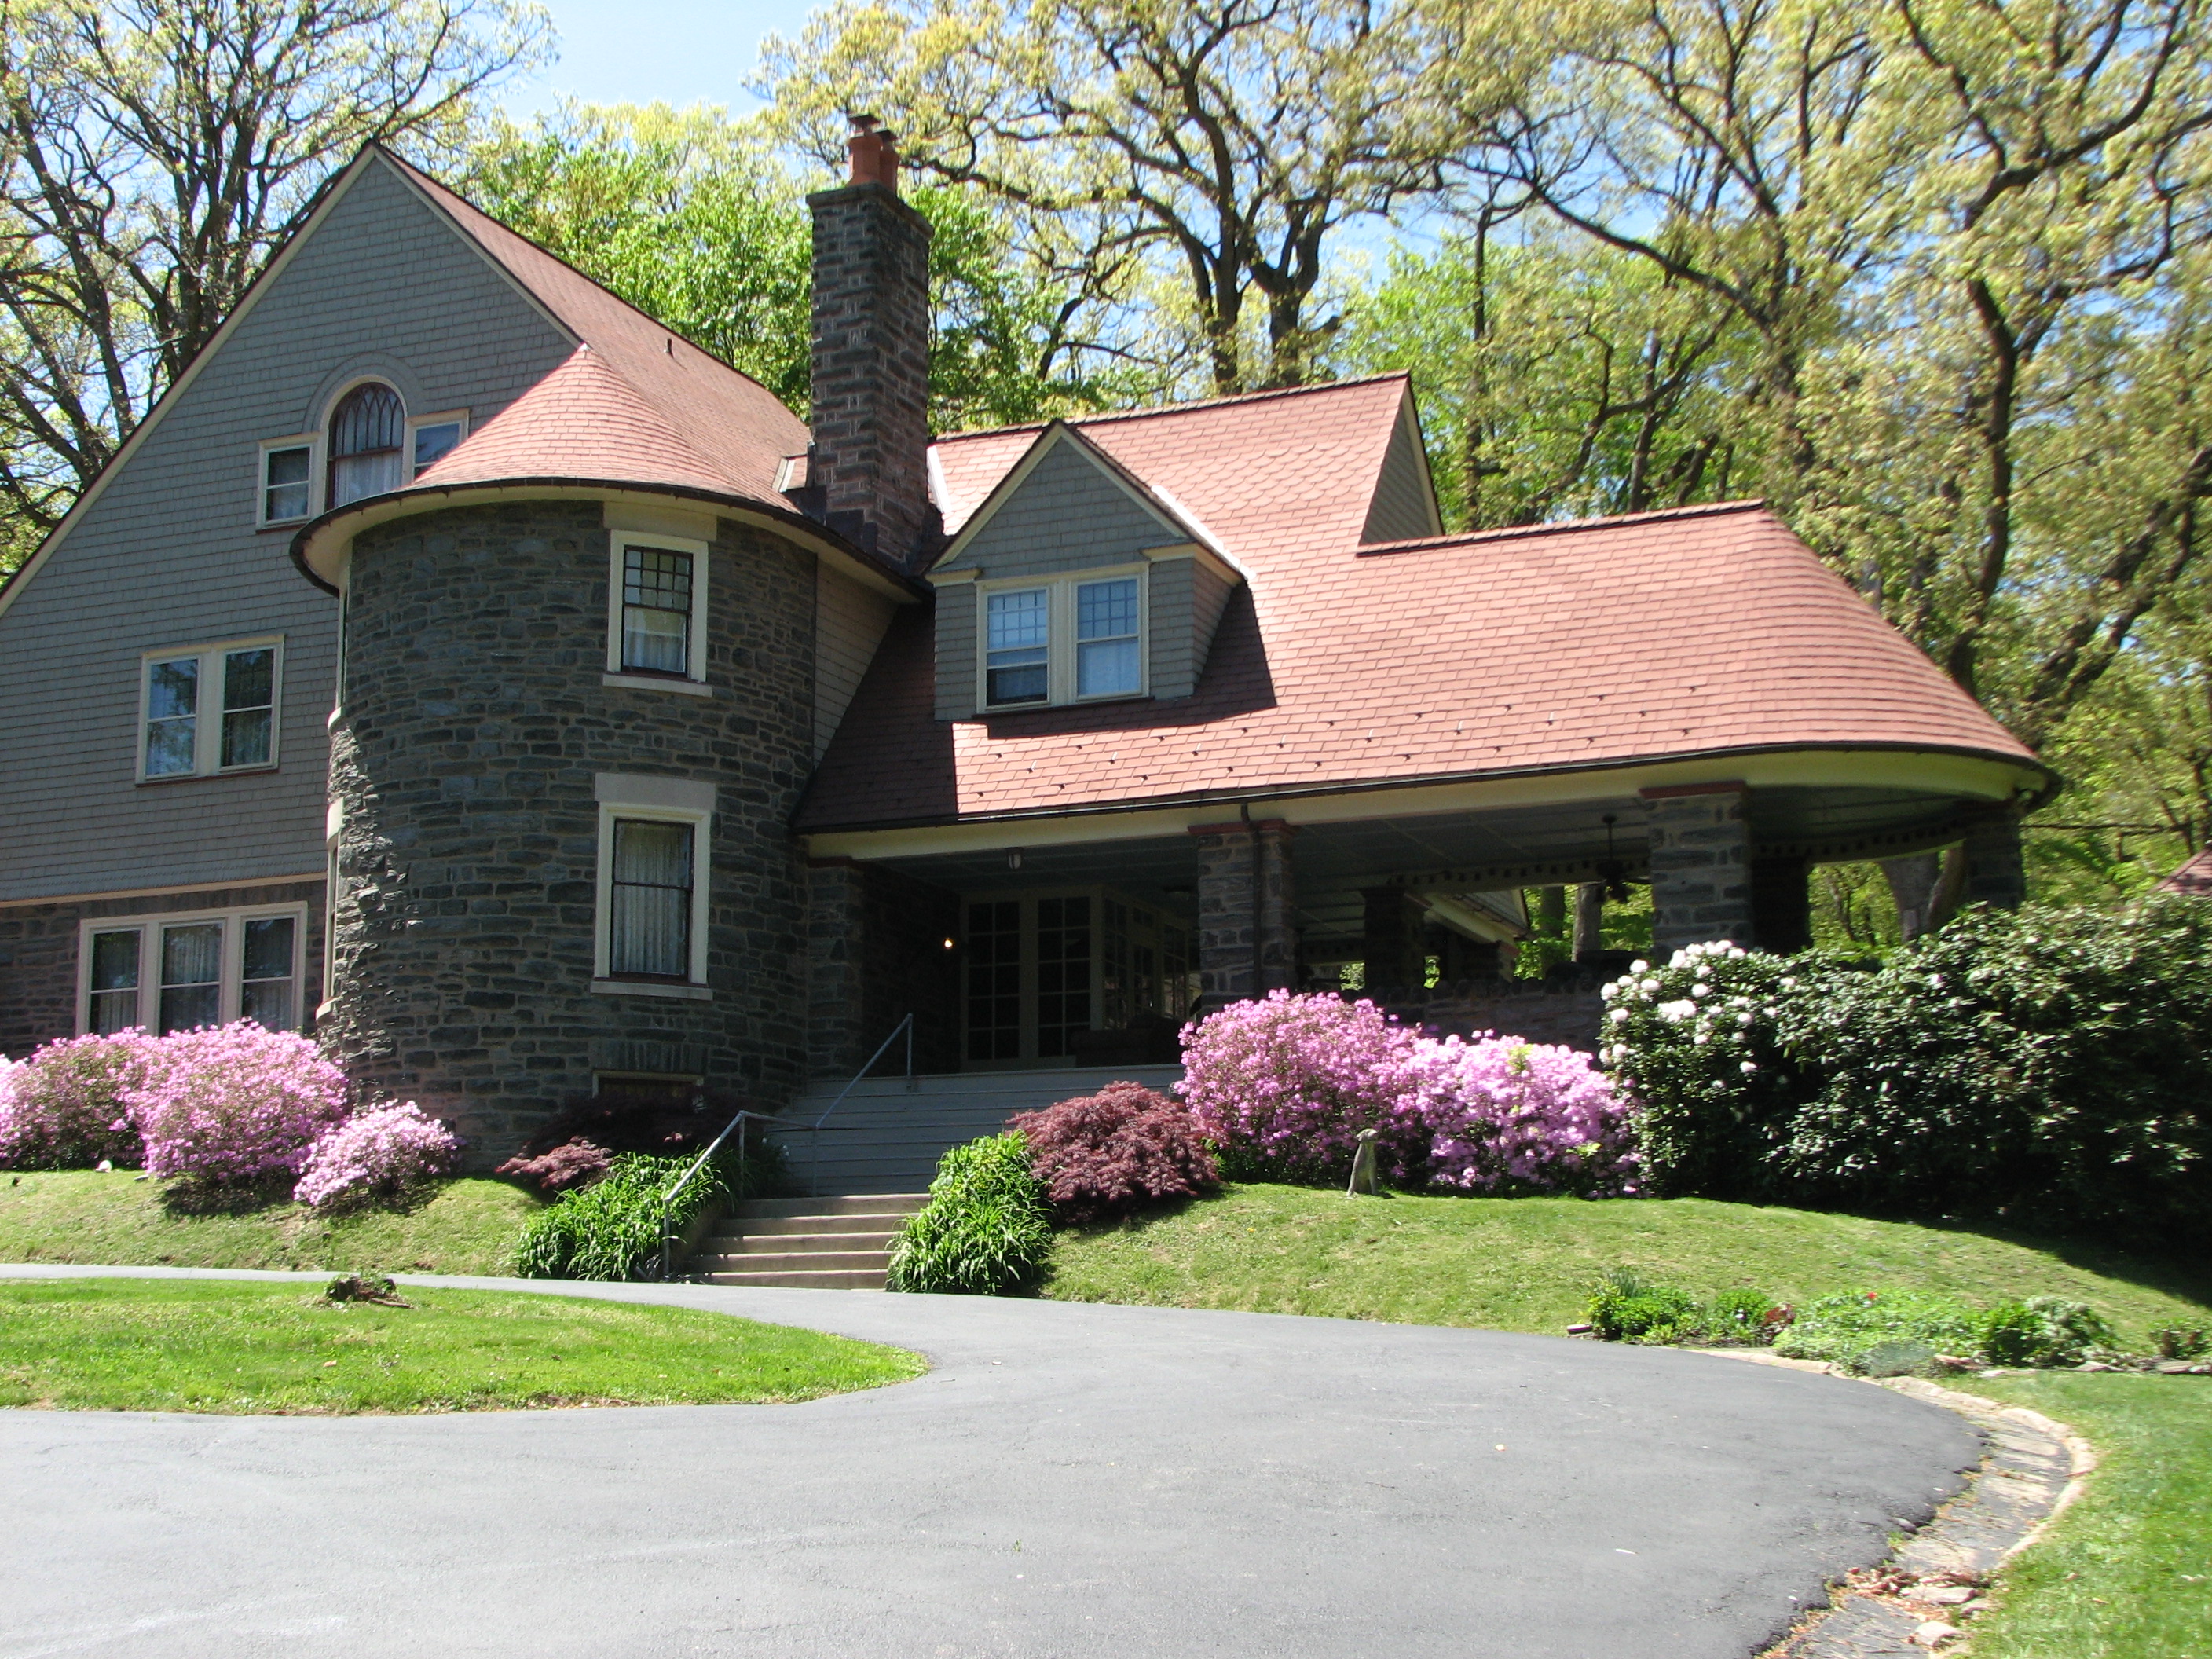 Horace Trumbauer designed the Shingle Style homes in the 1890s.